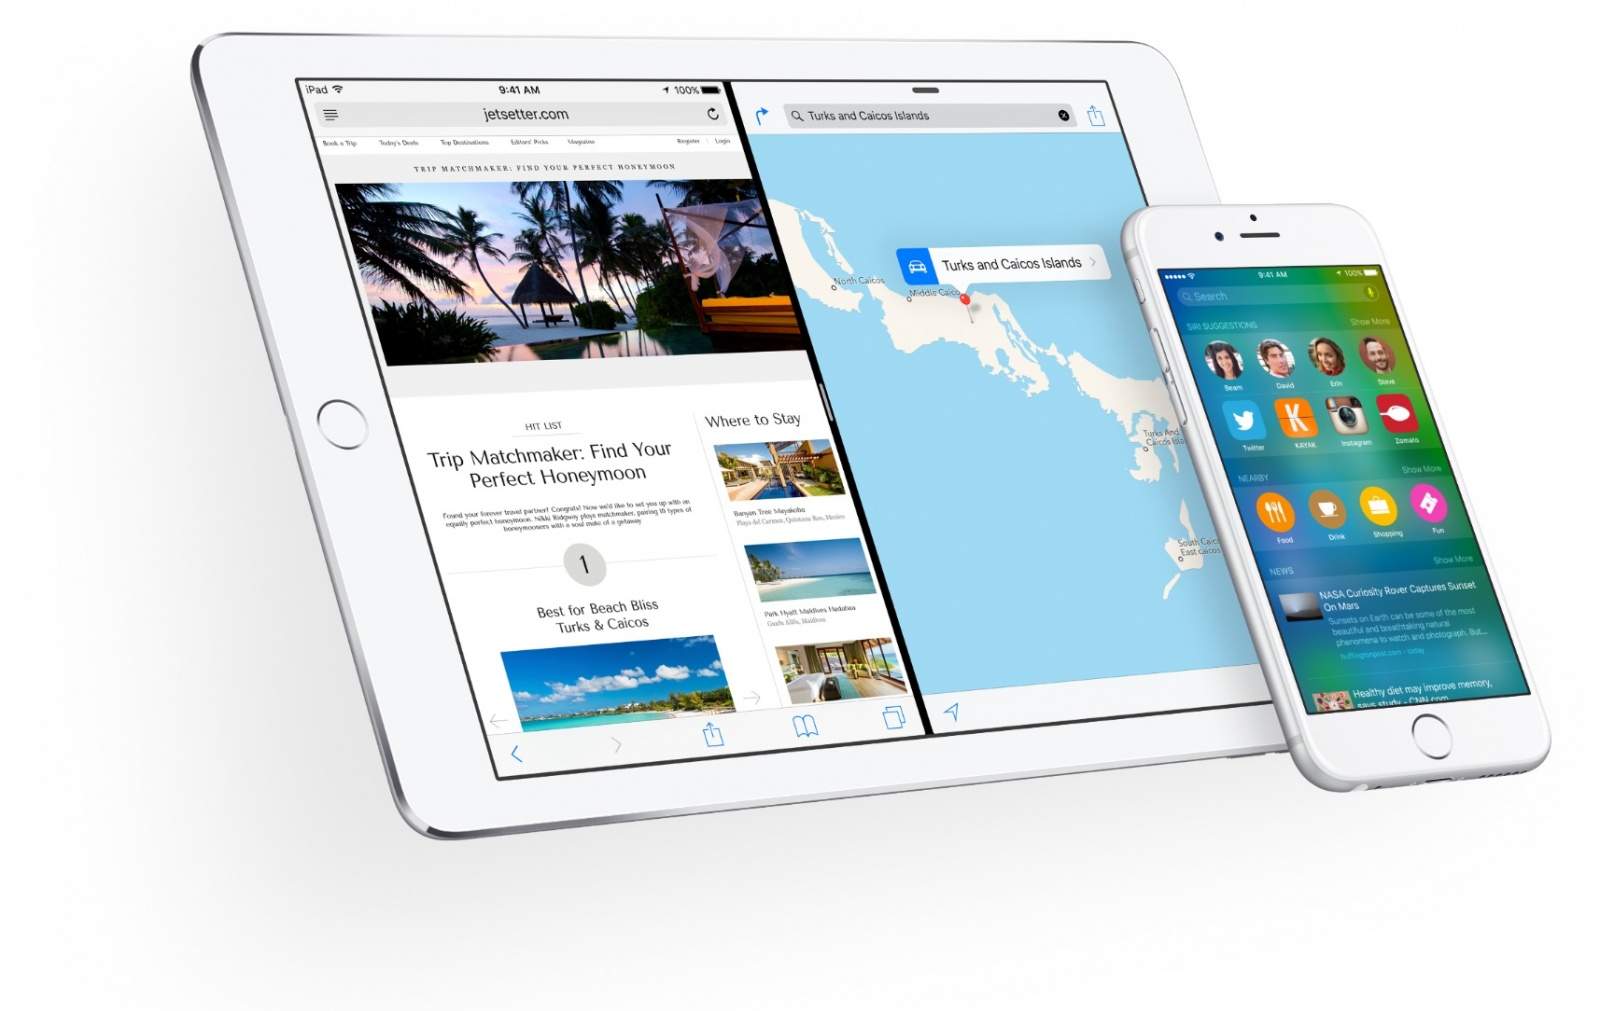 A new iOS 9 beta is here.